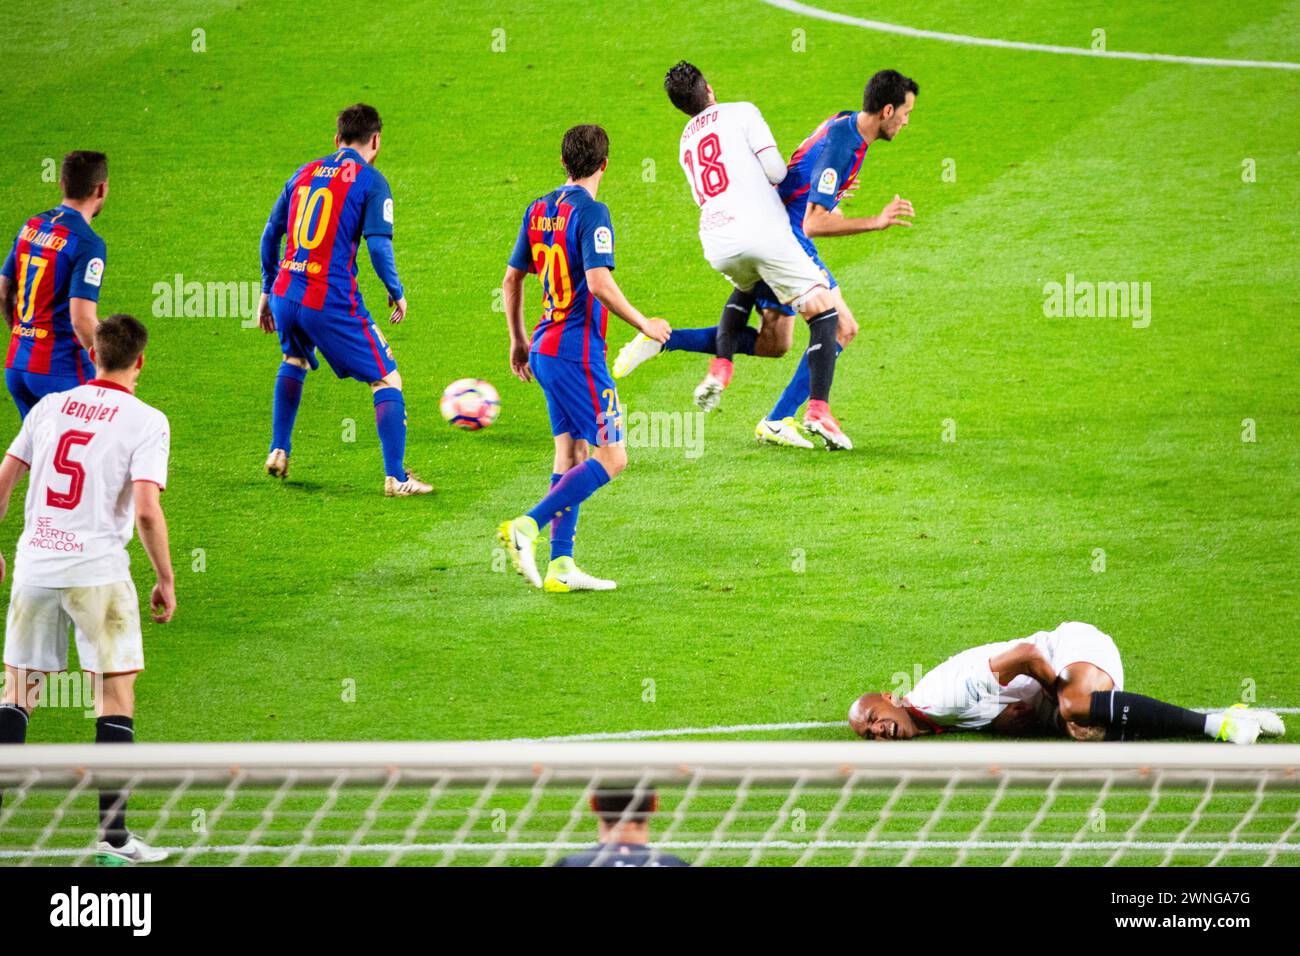 SERGIO BUSQUETS, UGLY TACKLE, BARCELONA FC, 2017: The game turns ugly as Sergio Busquets goes into a bruising tackle with Sergio Escudero as another Sevilla player Nzonzi lies on the ground clutching his groin. Barcelona FC v Sevilla FC at Camp Nou, Barcelona on 5 April 2017. Photo: Rob Watkins. Barca won the game 3-0 with three goals in the first 33 minutes. The game was played in a deluge of rain during a massive spring storm. Stock Photo